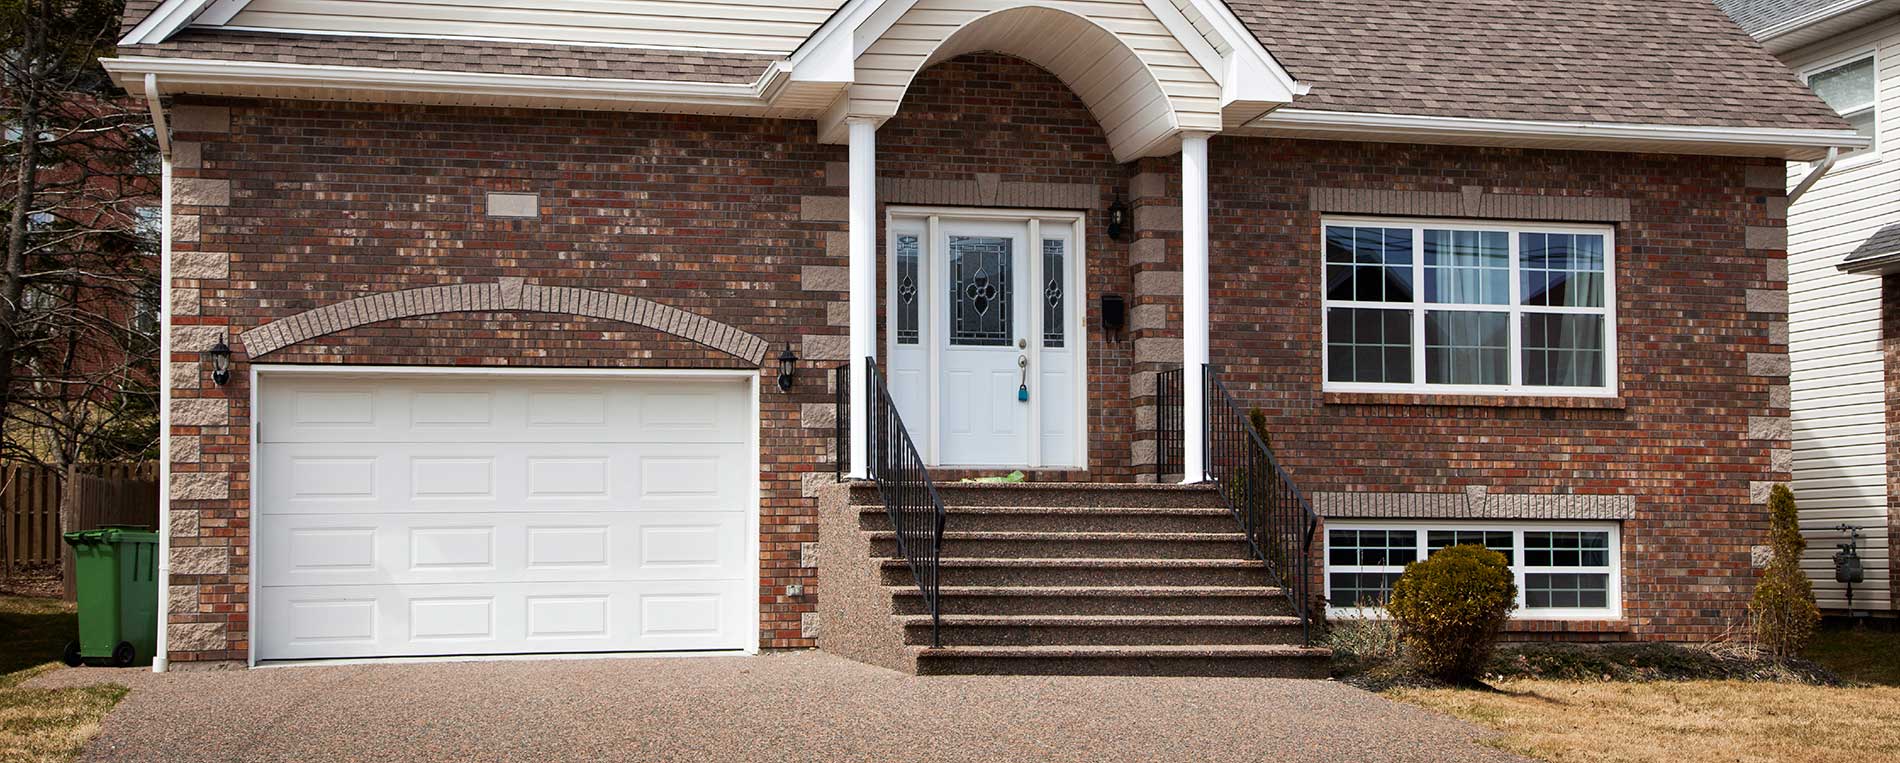 How Your Garage Doors Will Come in Handy This Valentines Day